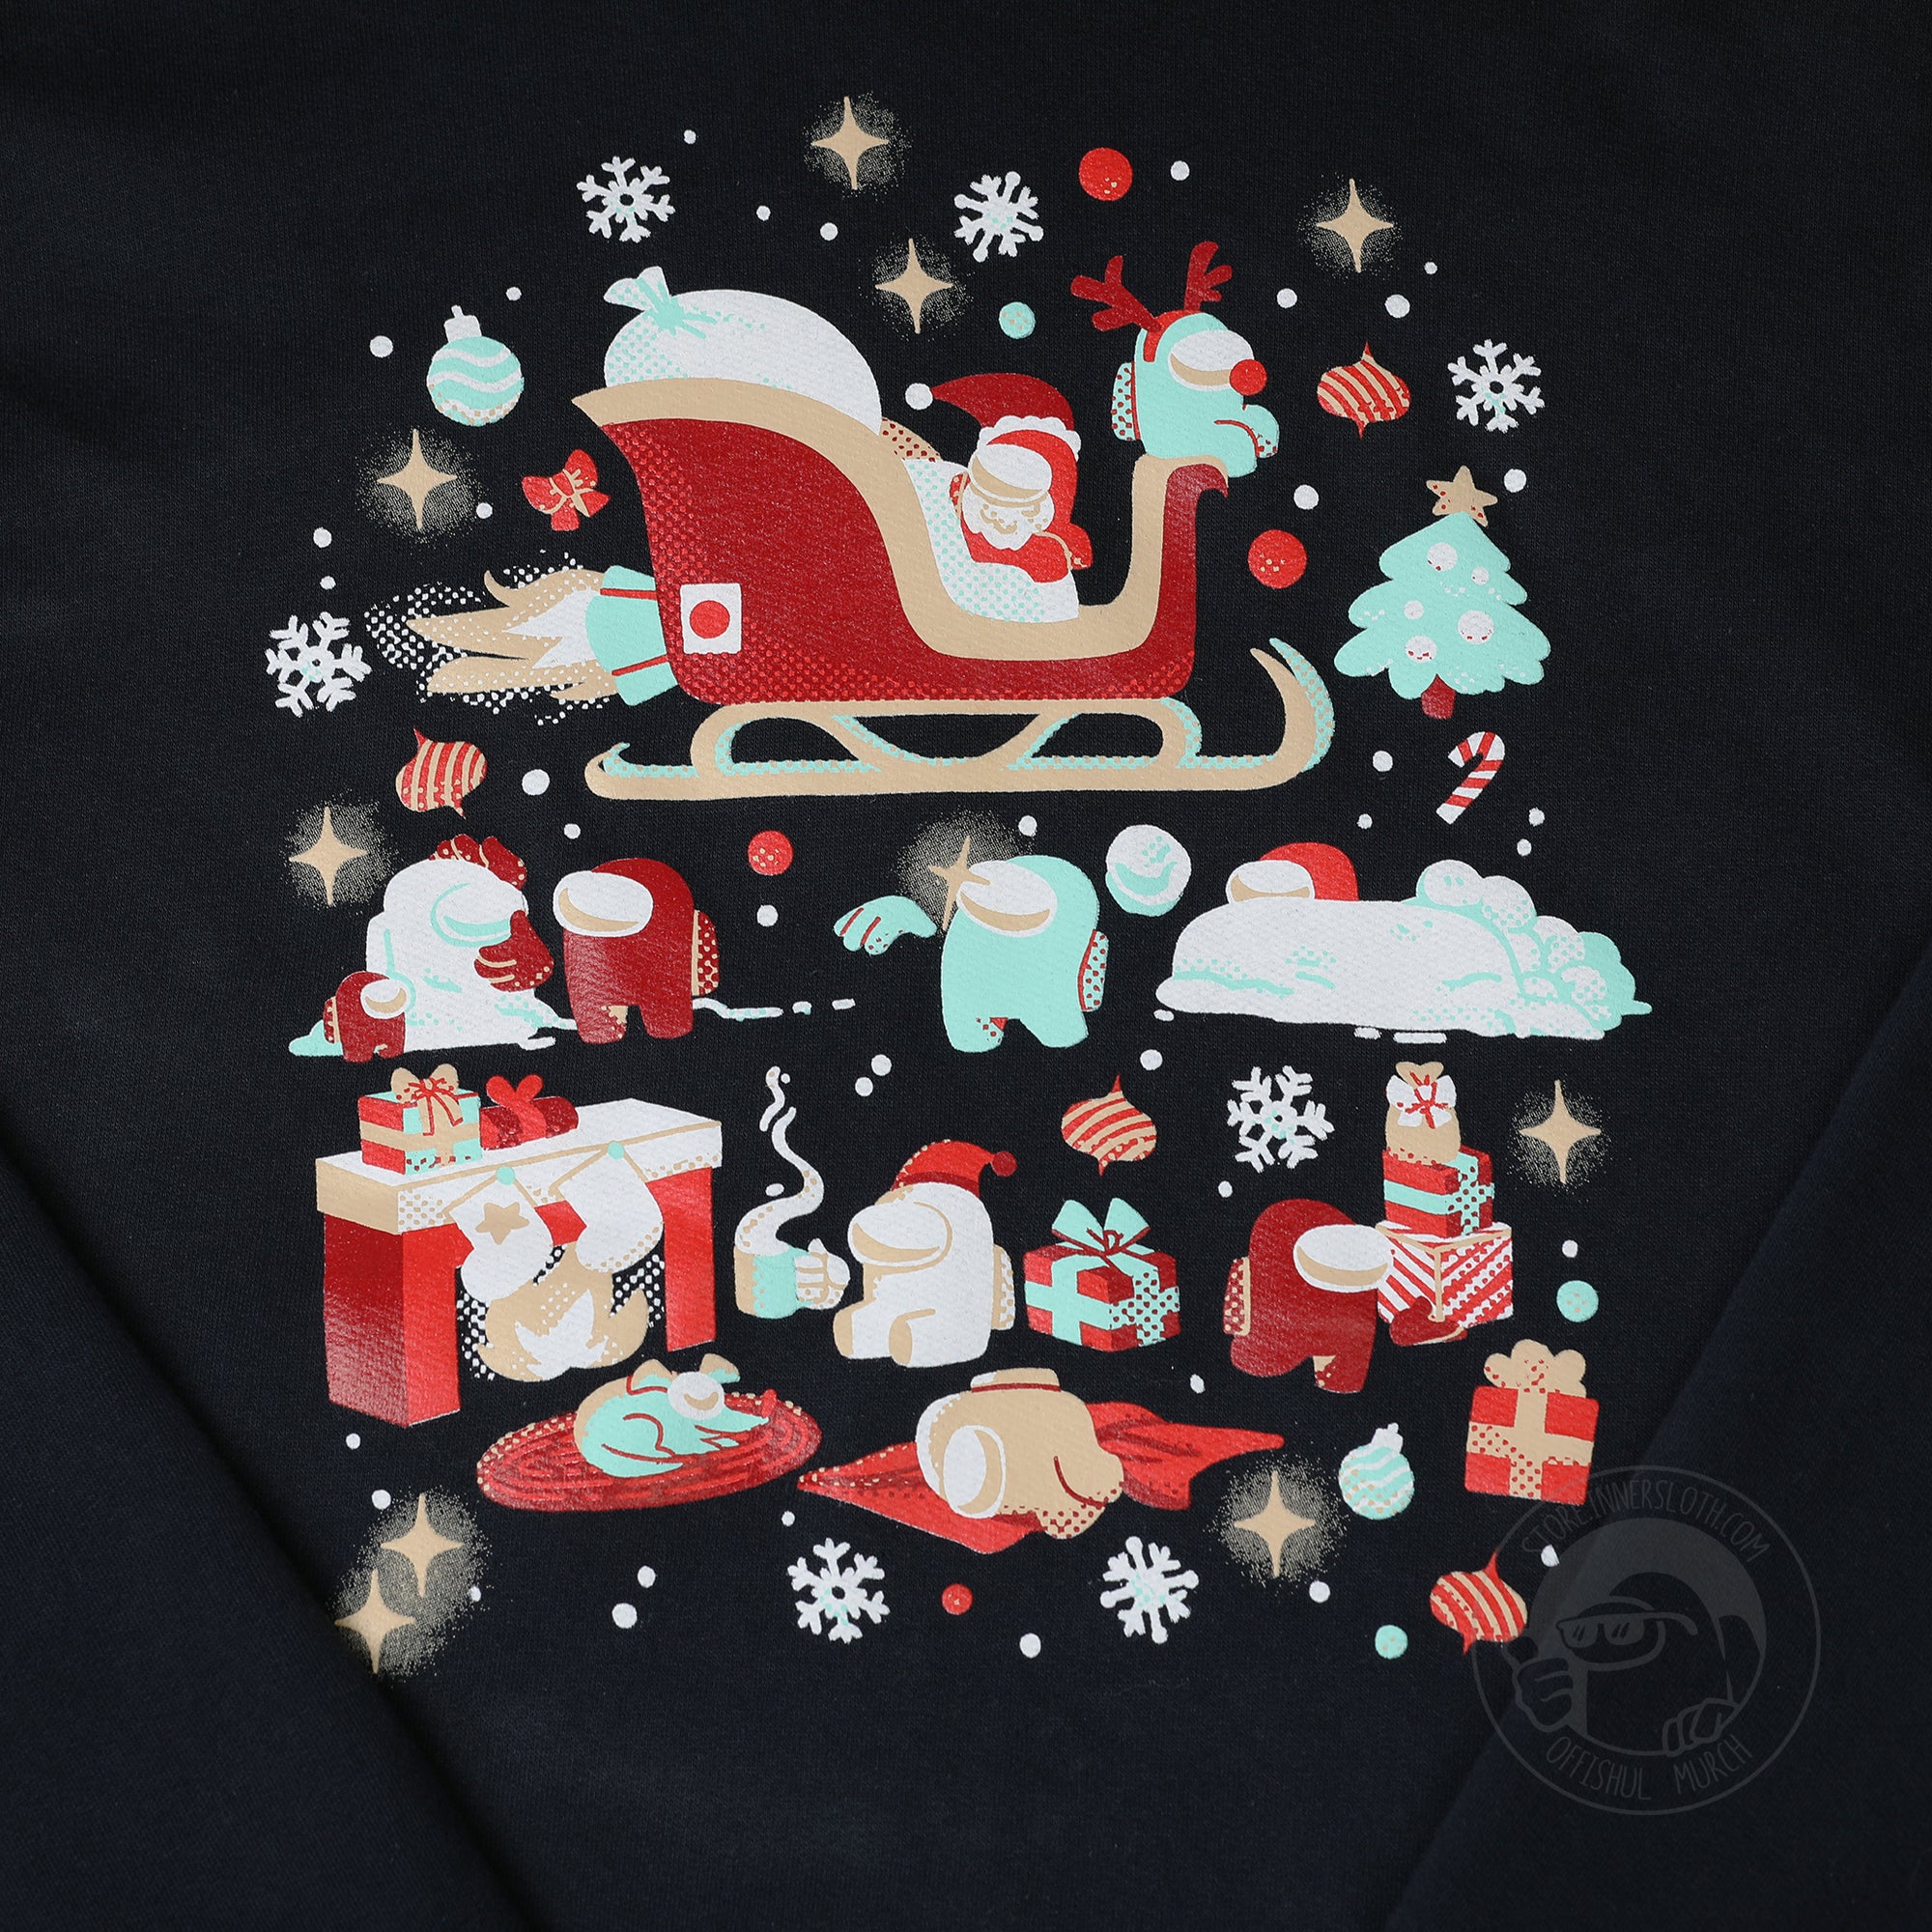 A flat lay photograph of a black longsleeve hoodie on a white background. The garment’s design depicts several Crewmates engaged in various holiday activities such as building a snowman, throwing snowballs, making snowforts, relaxing with cocoa, carrying presents, and taking naps. Flying overhead is a Santa and Rudolph Crewmate in a jet engine sleigh. The scene is surrounded by christmas trees, ornaments, candy canes, snow, snowflakes, bows, red noses, and starry sparkles. Designed by Mengmeng Liu